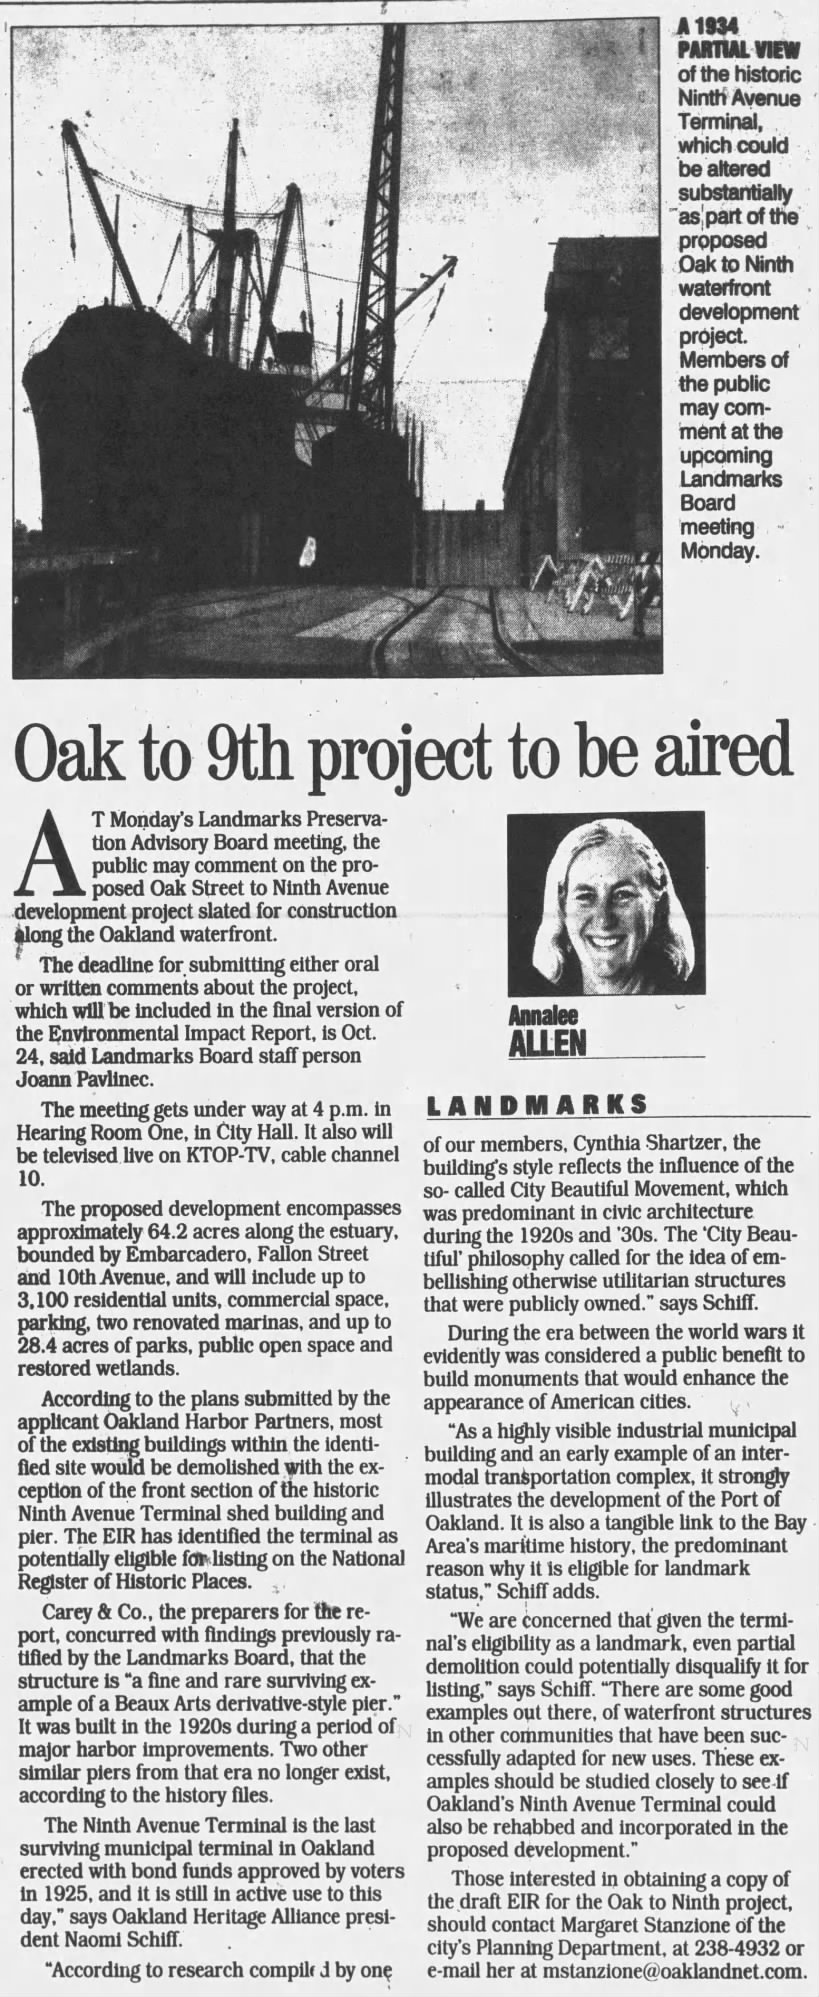 Annalee Allen
Oak to 9th project to be aired